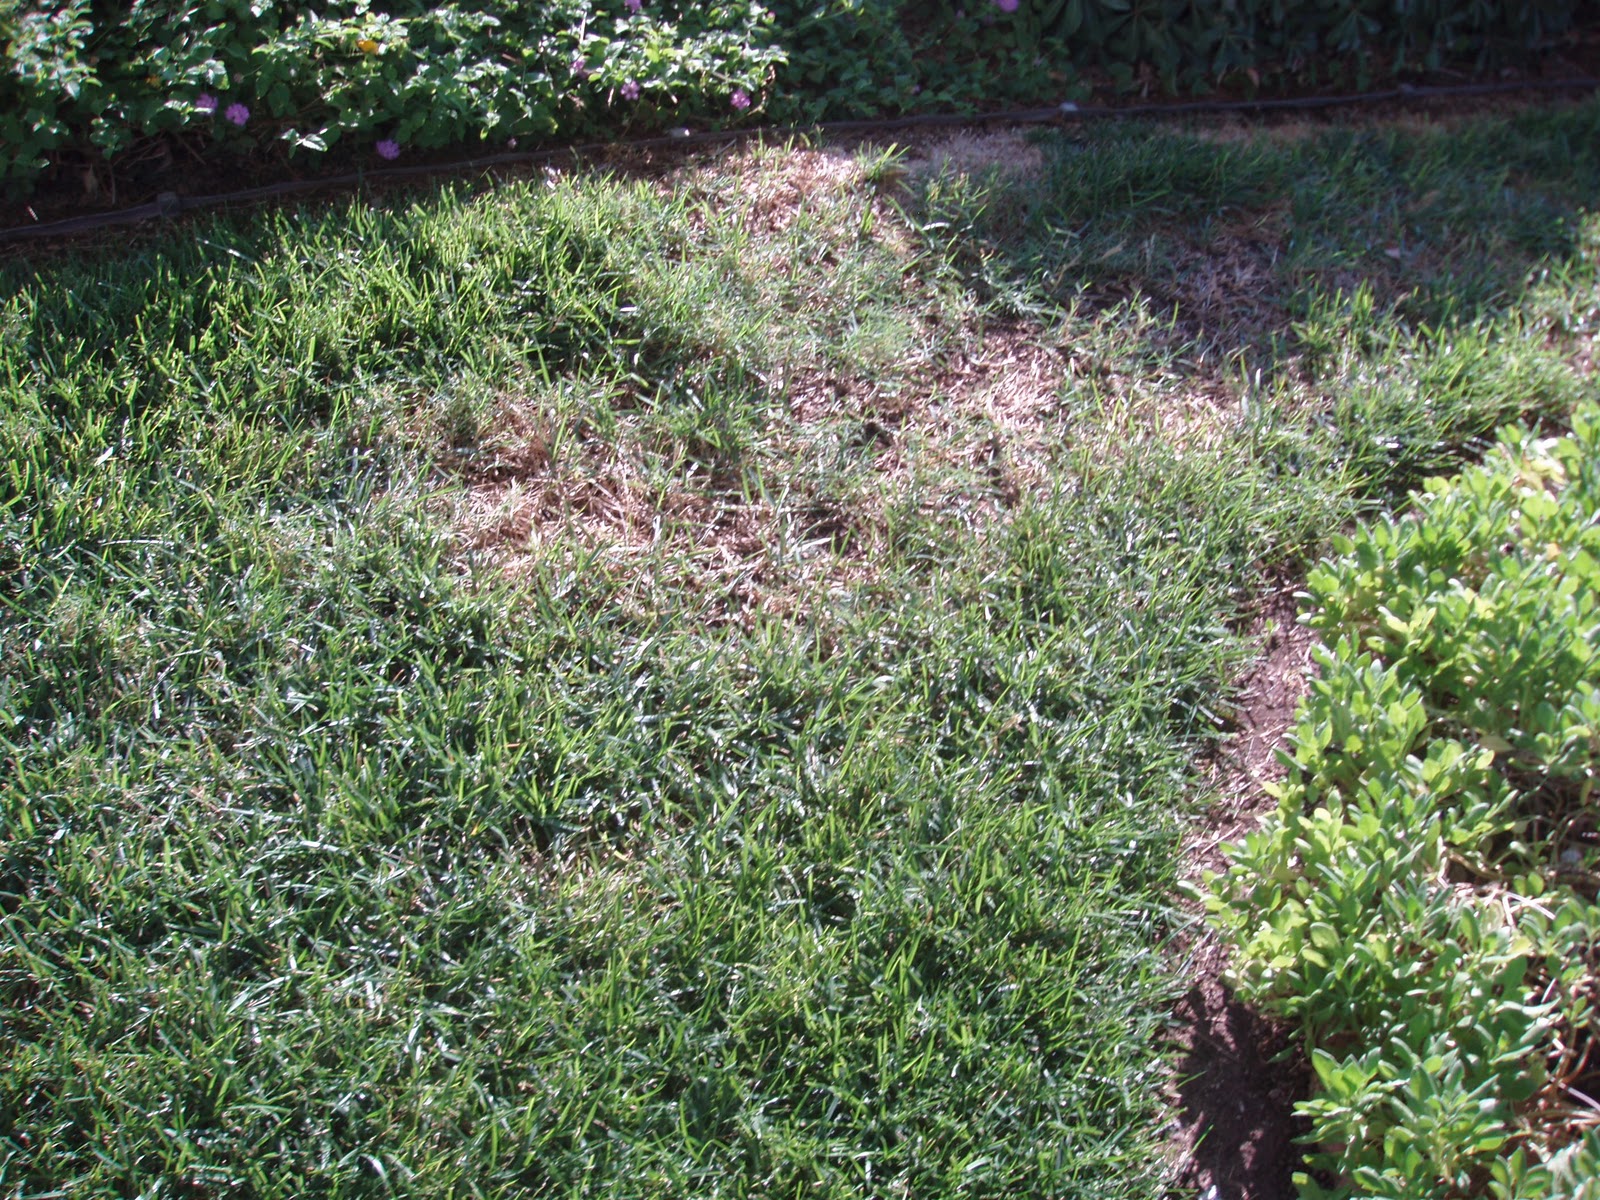 Xtremehorticulture Of The Desert Lawn Brown Patches May Be Summer